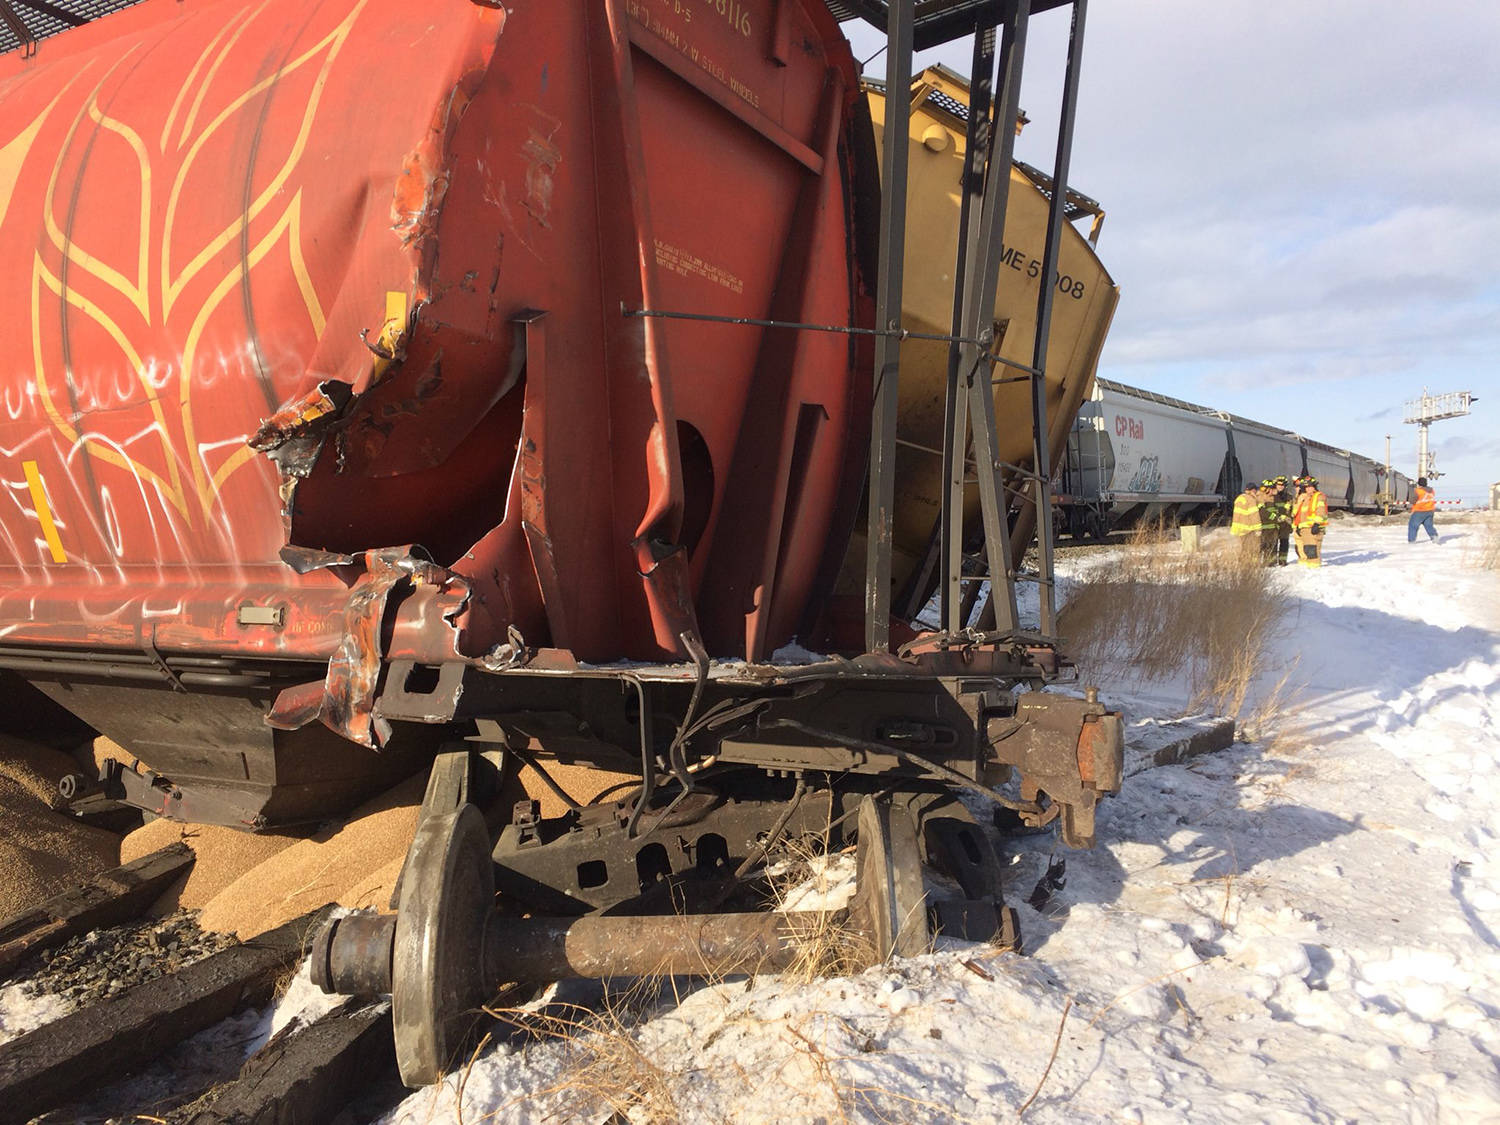 Several grain cars left the CP Rail tracks near 101 Street and Ellerslie Road in the early afternoon Feb. 16, spilling some of their contents. It was reported no hazardous materials were spilled. Image: Twitter - Edmonton Police Service Southeast Division                                 Several grain cars left the CP Rail tracks near 101 Street and Ellerslie Road in the early afternoon Feb. 16, spilling some of their contents. It was reported no hazardous materials were spilled. Image: Twitter - Edmonton Police Service Southeast Division